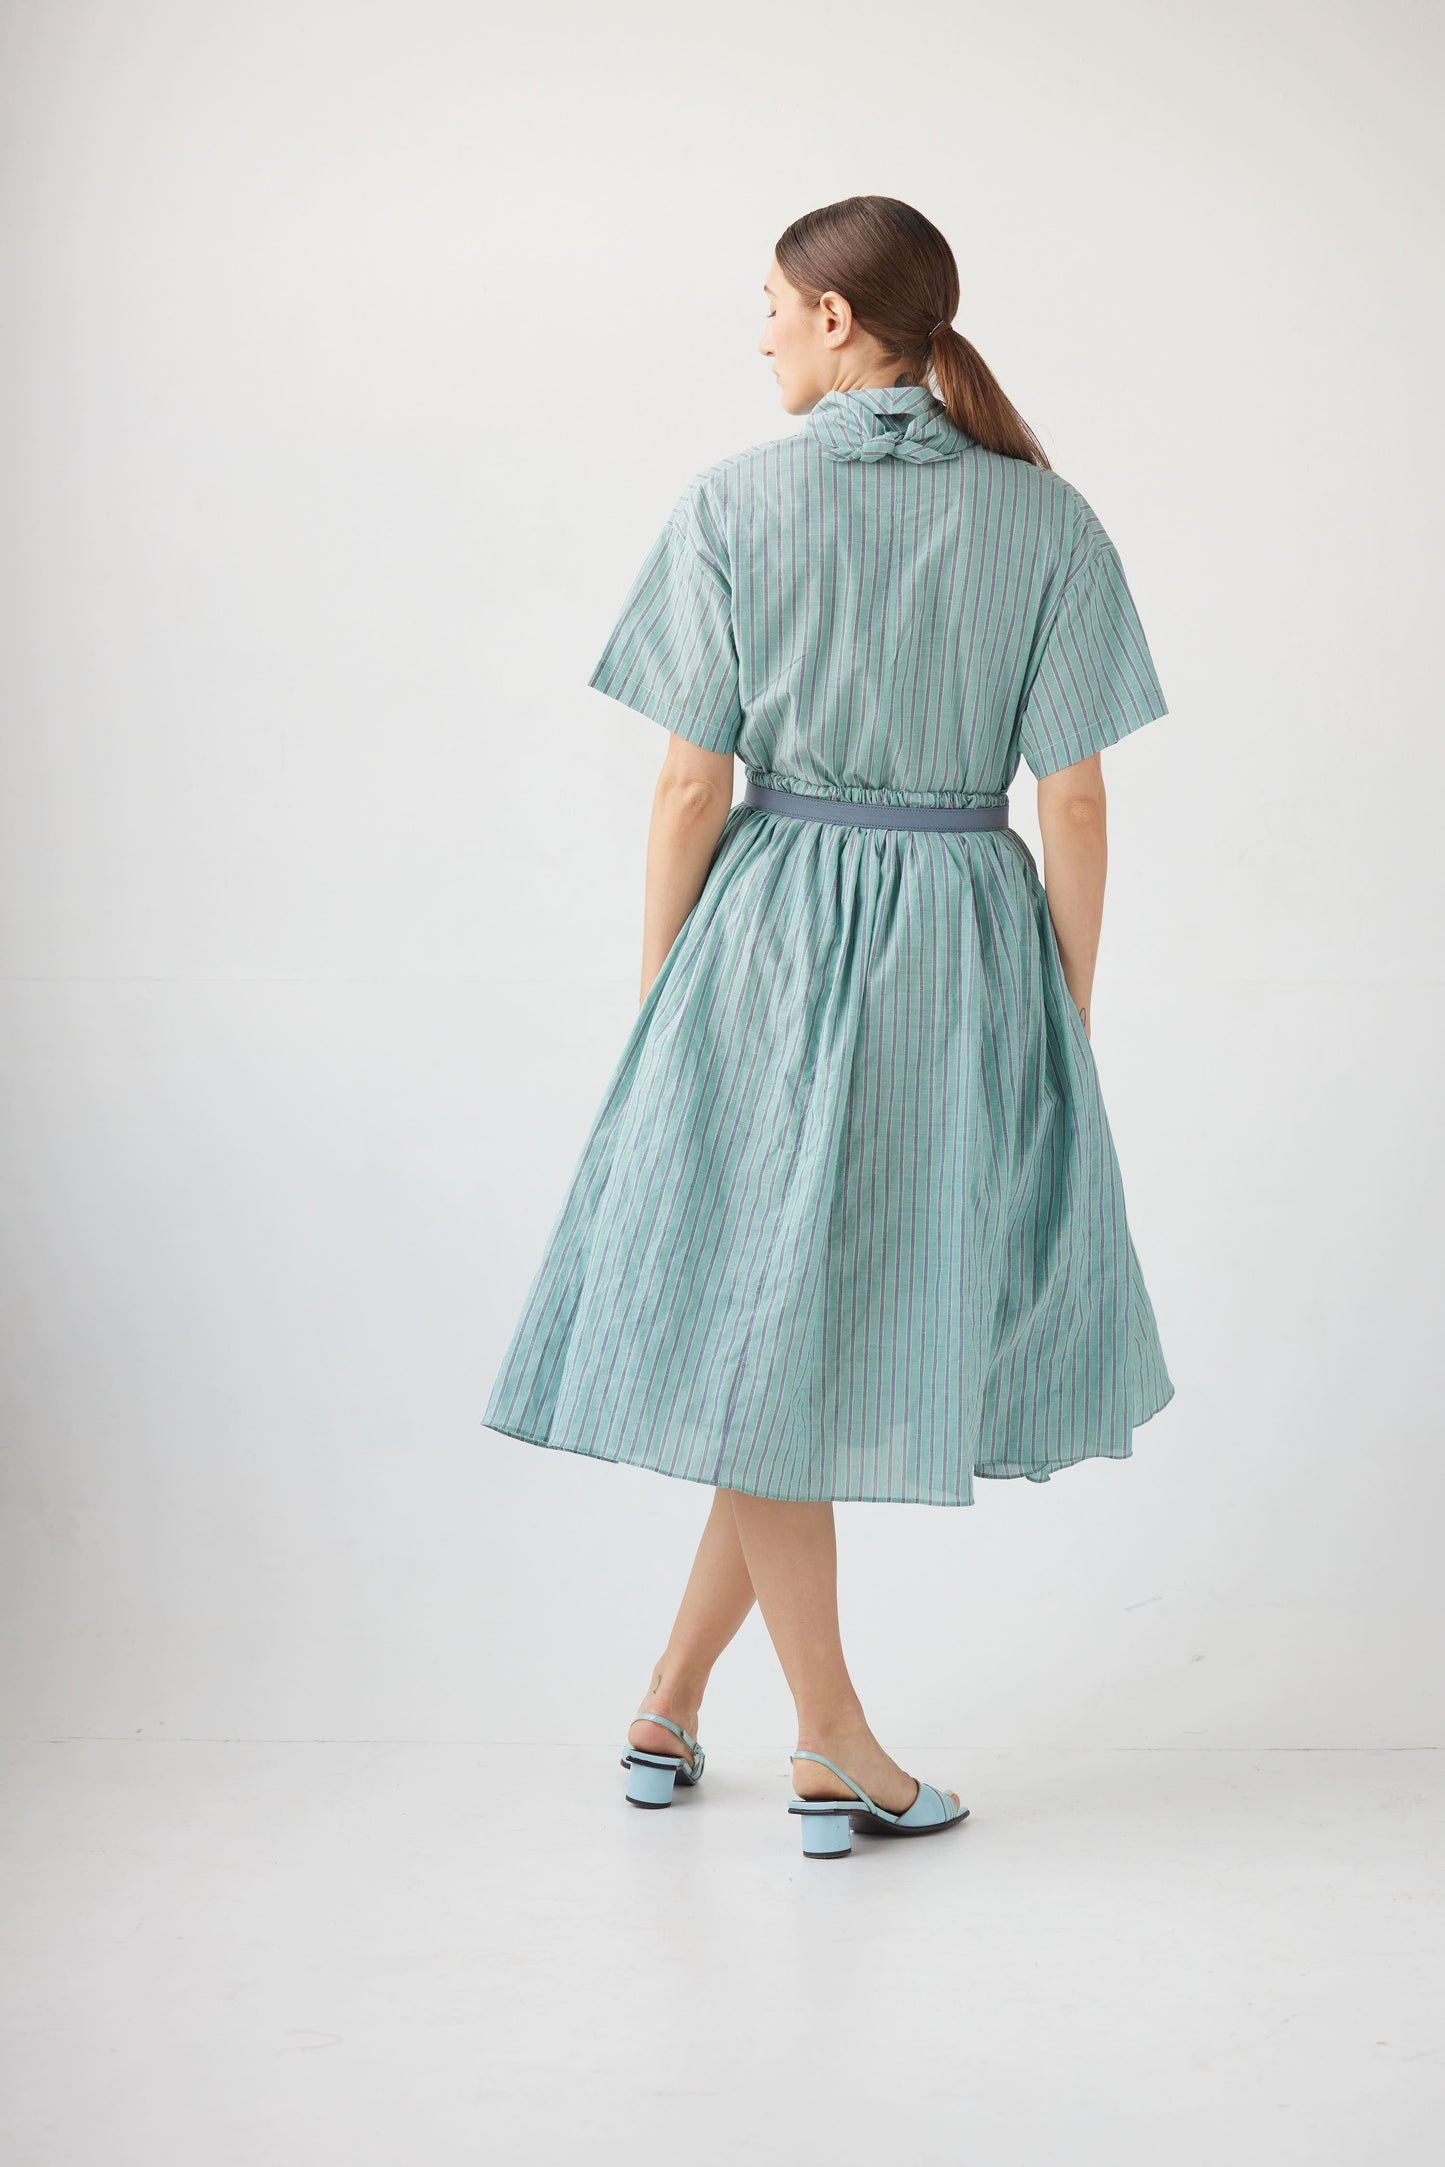 Erica Skirt in Striped Voile Skirts CHRISTINE ALCALAY   